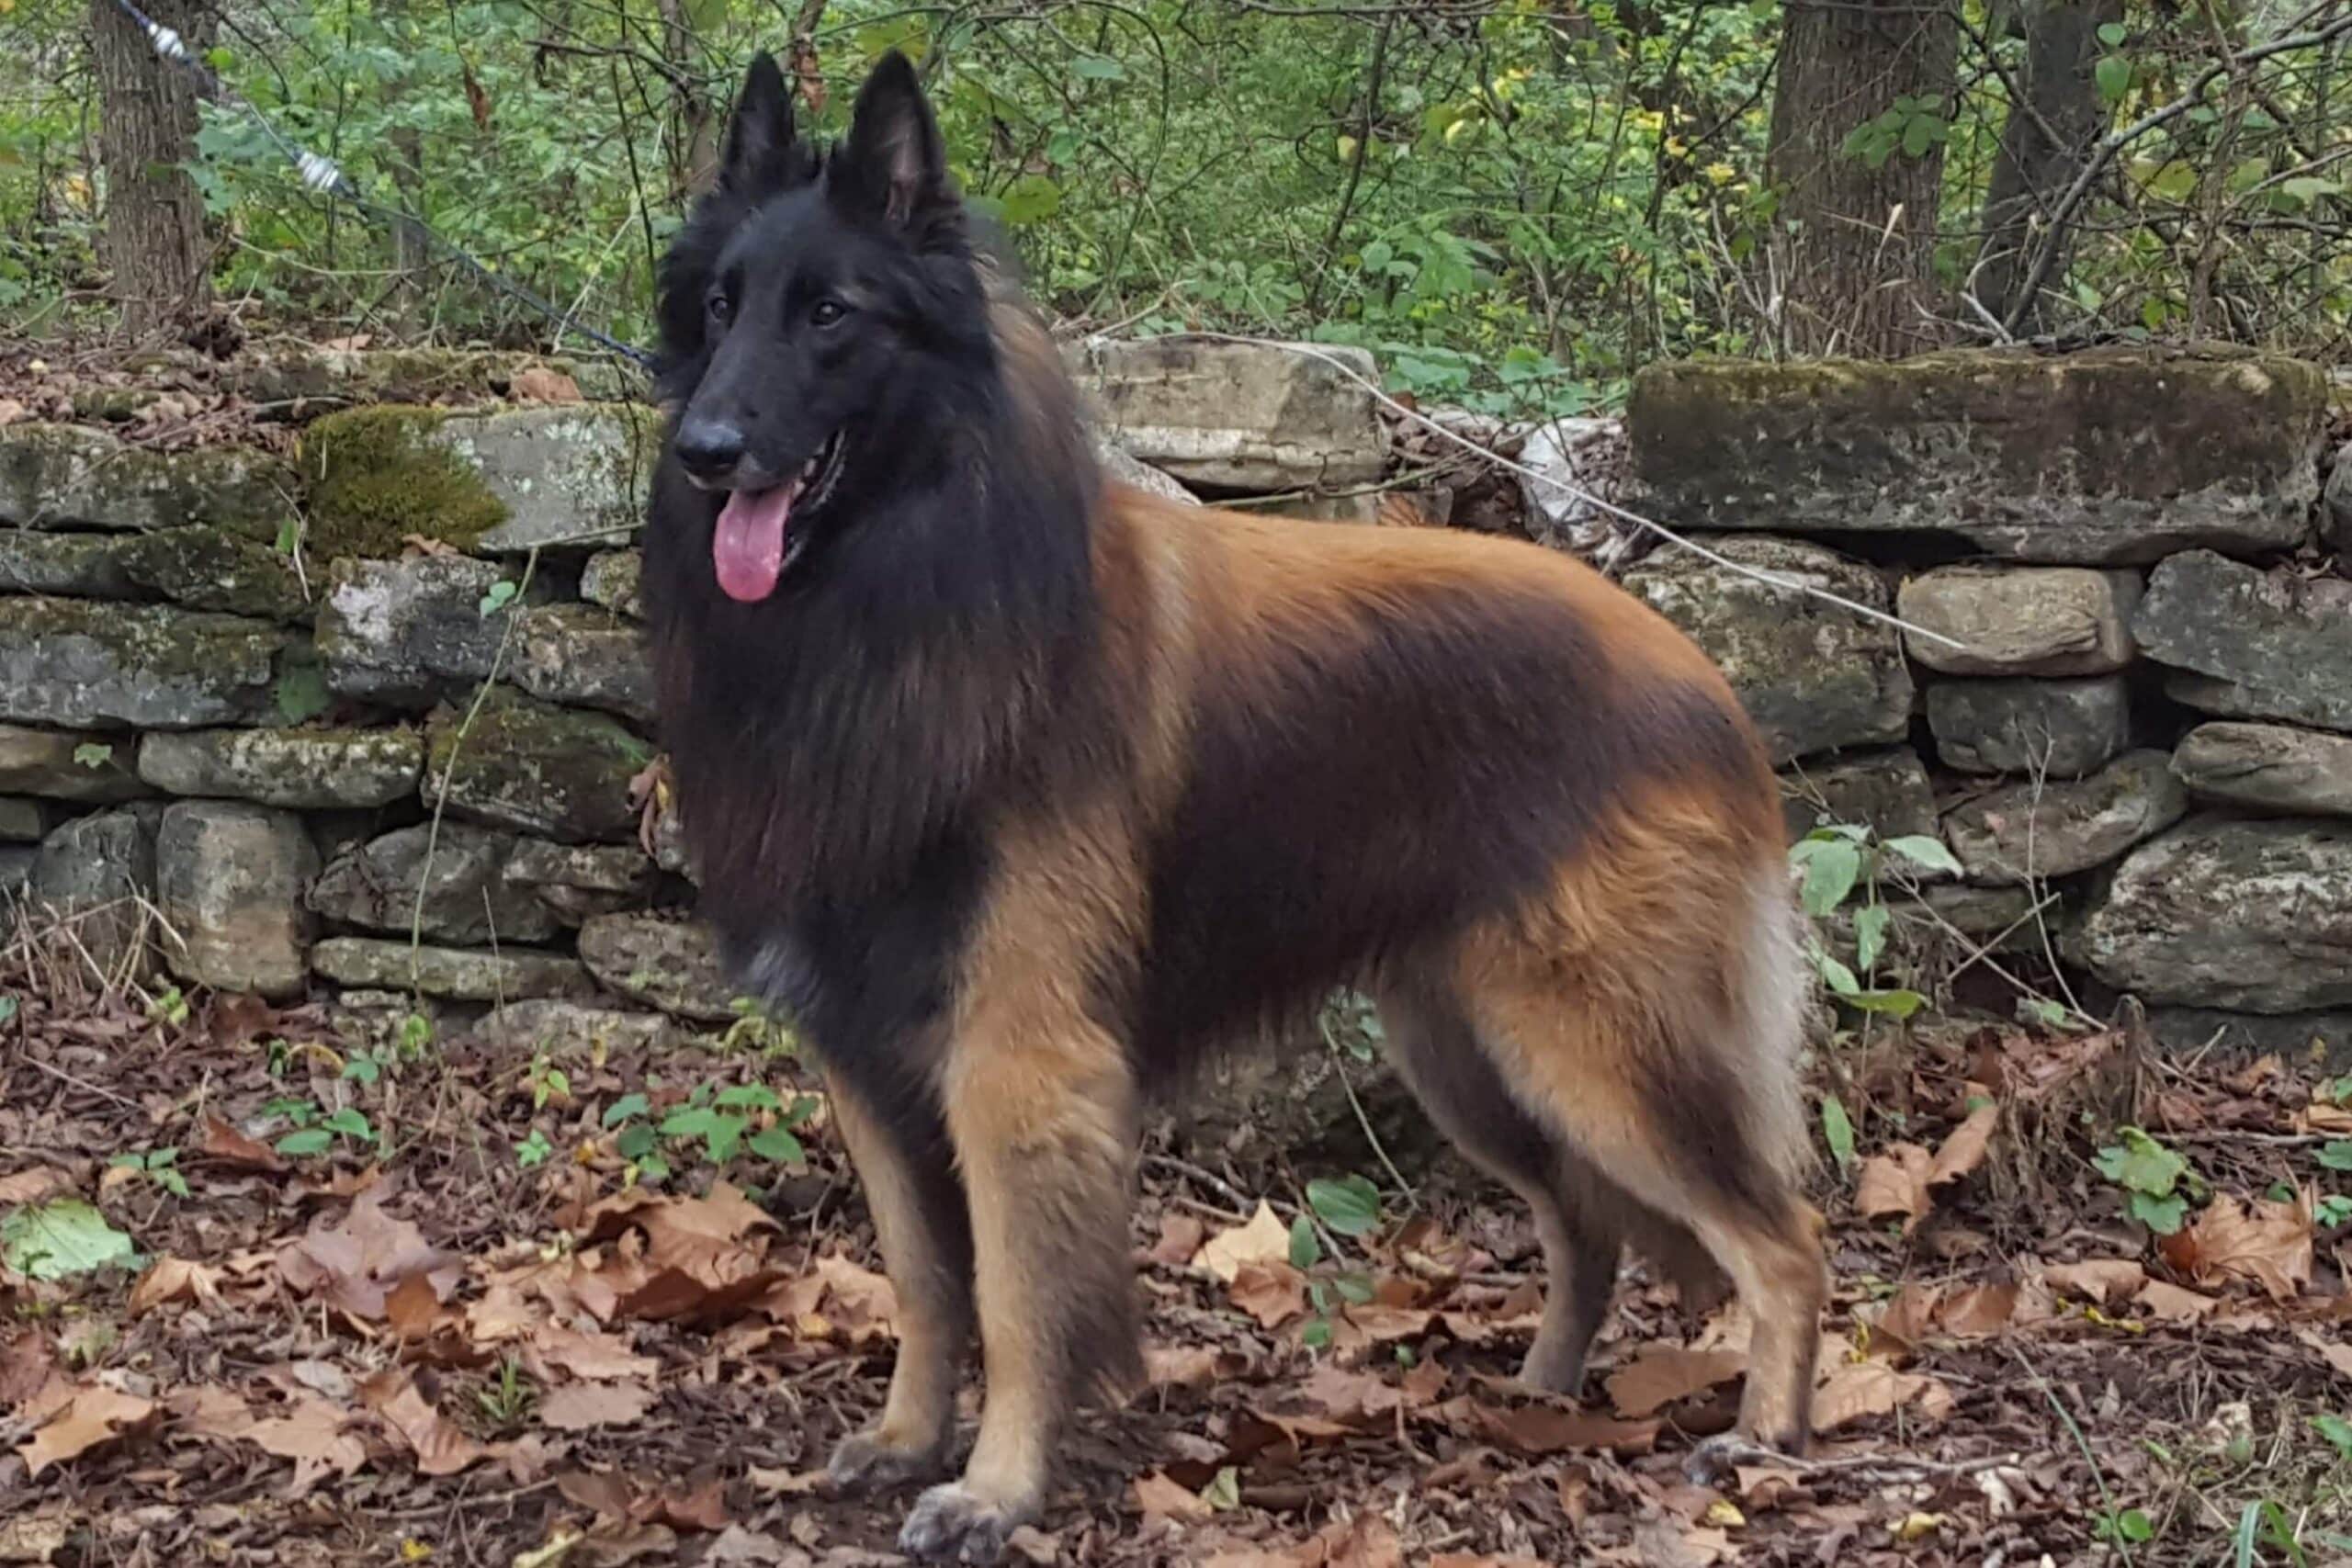 A Belgian Tervuren standing tall with a thick, long coat and a confident expression.